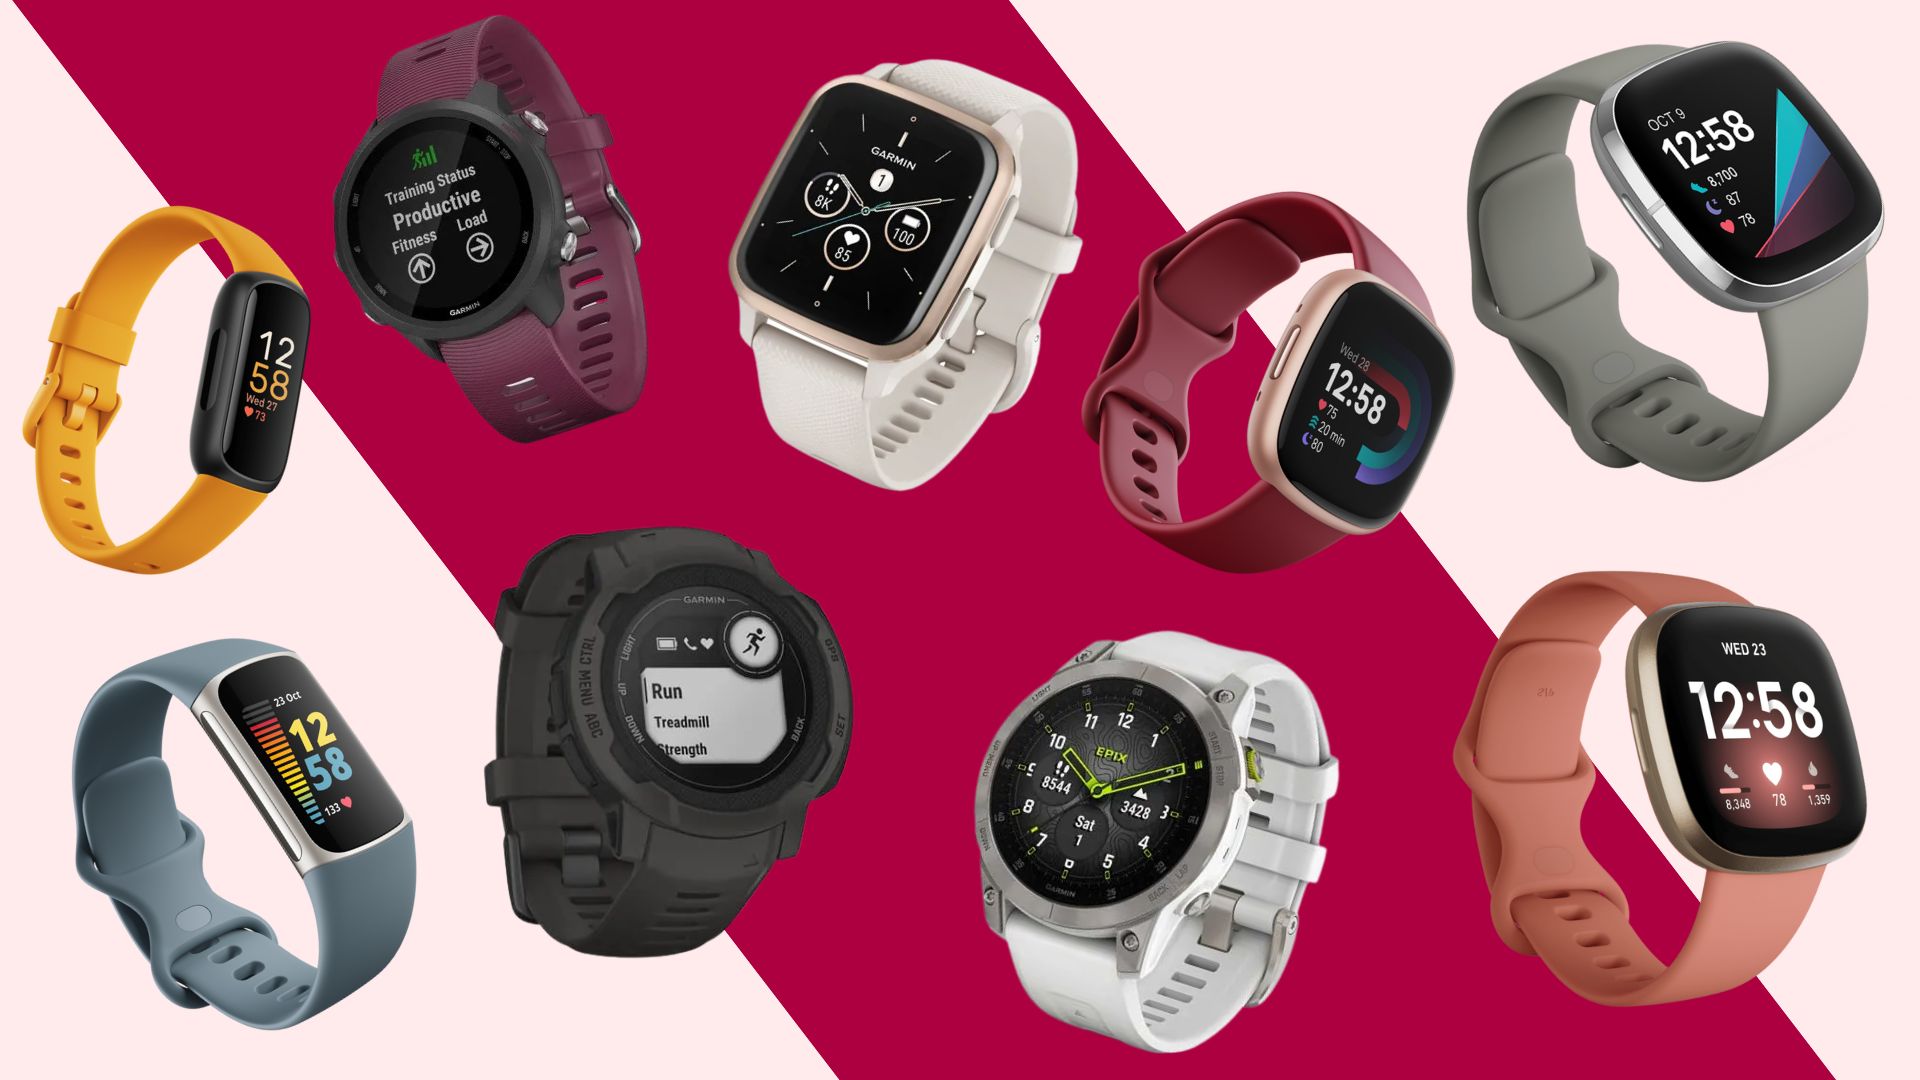 Garmin vs - which fitness tracker is best? | Woman & Home